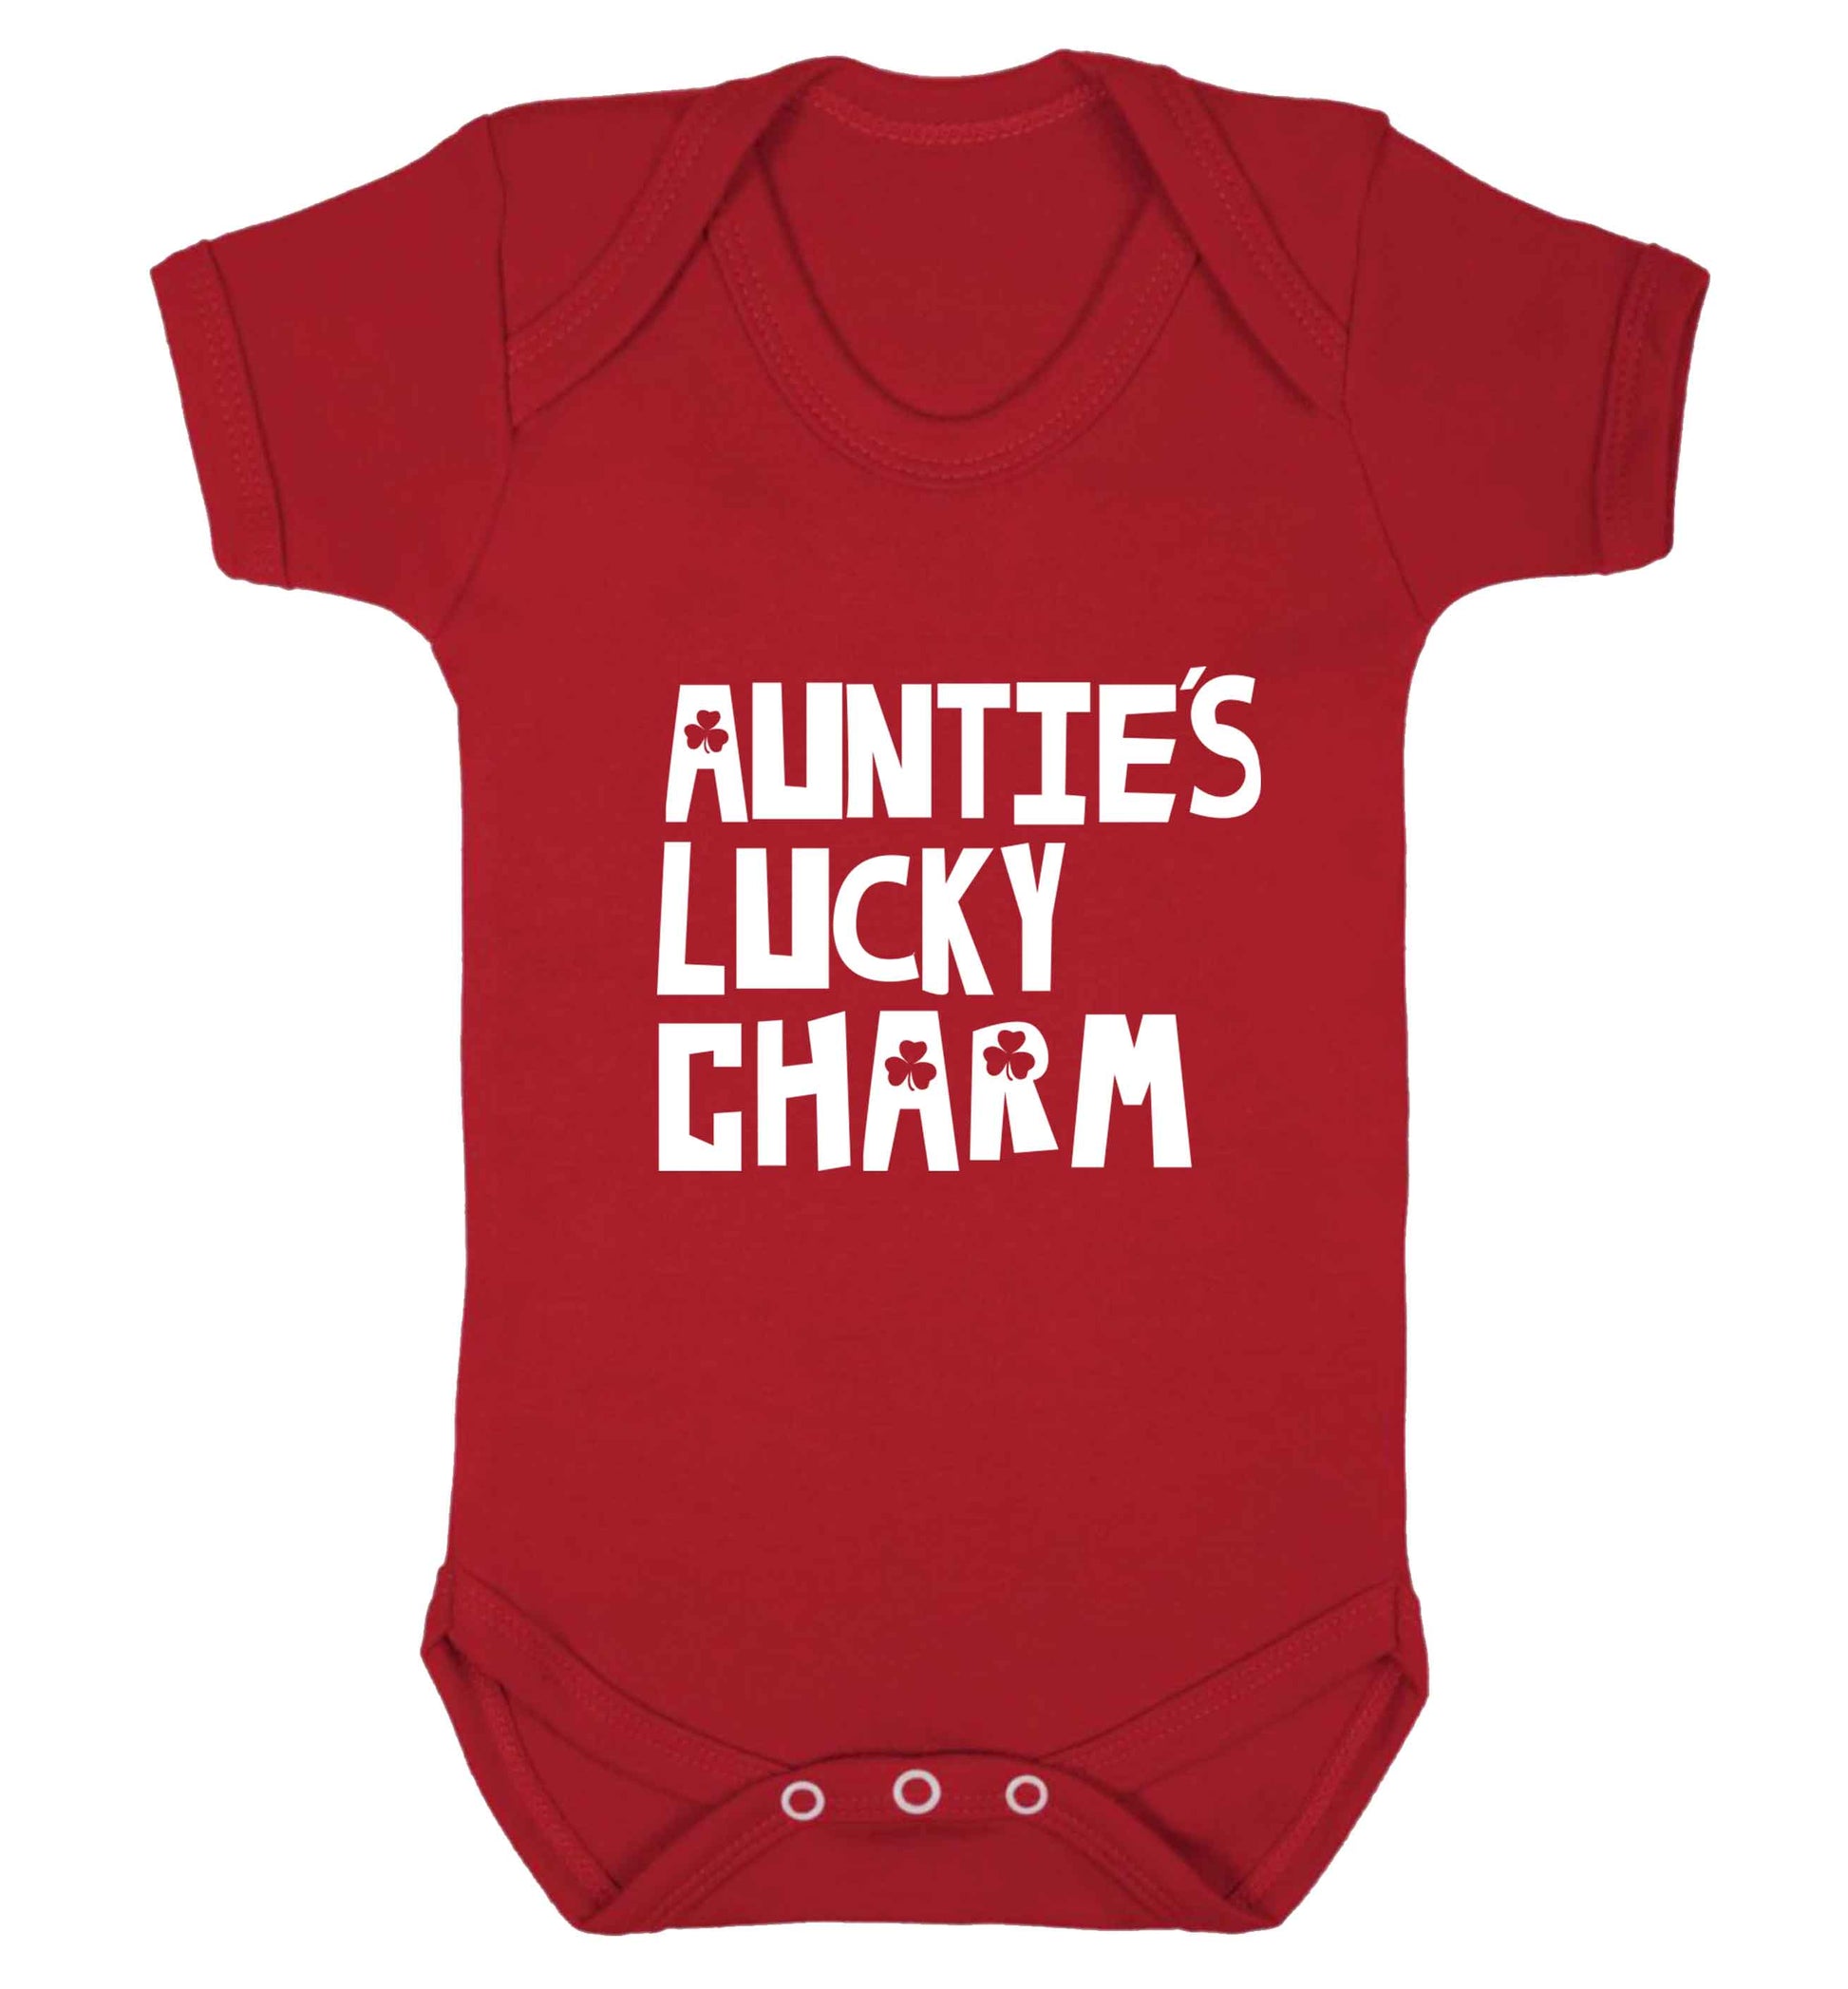 Auntie's lucky charm baby vest red 18-24 months